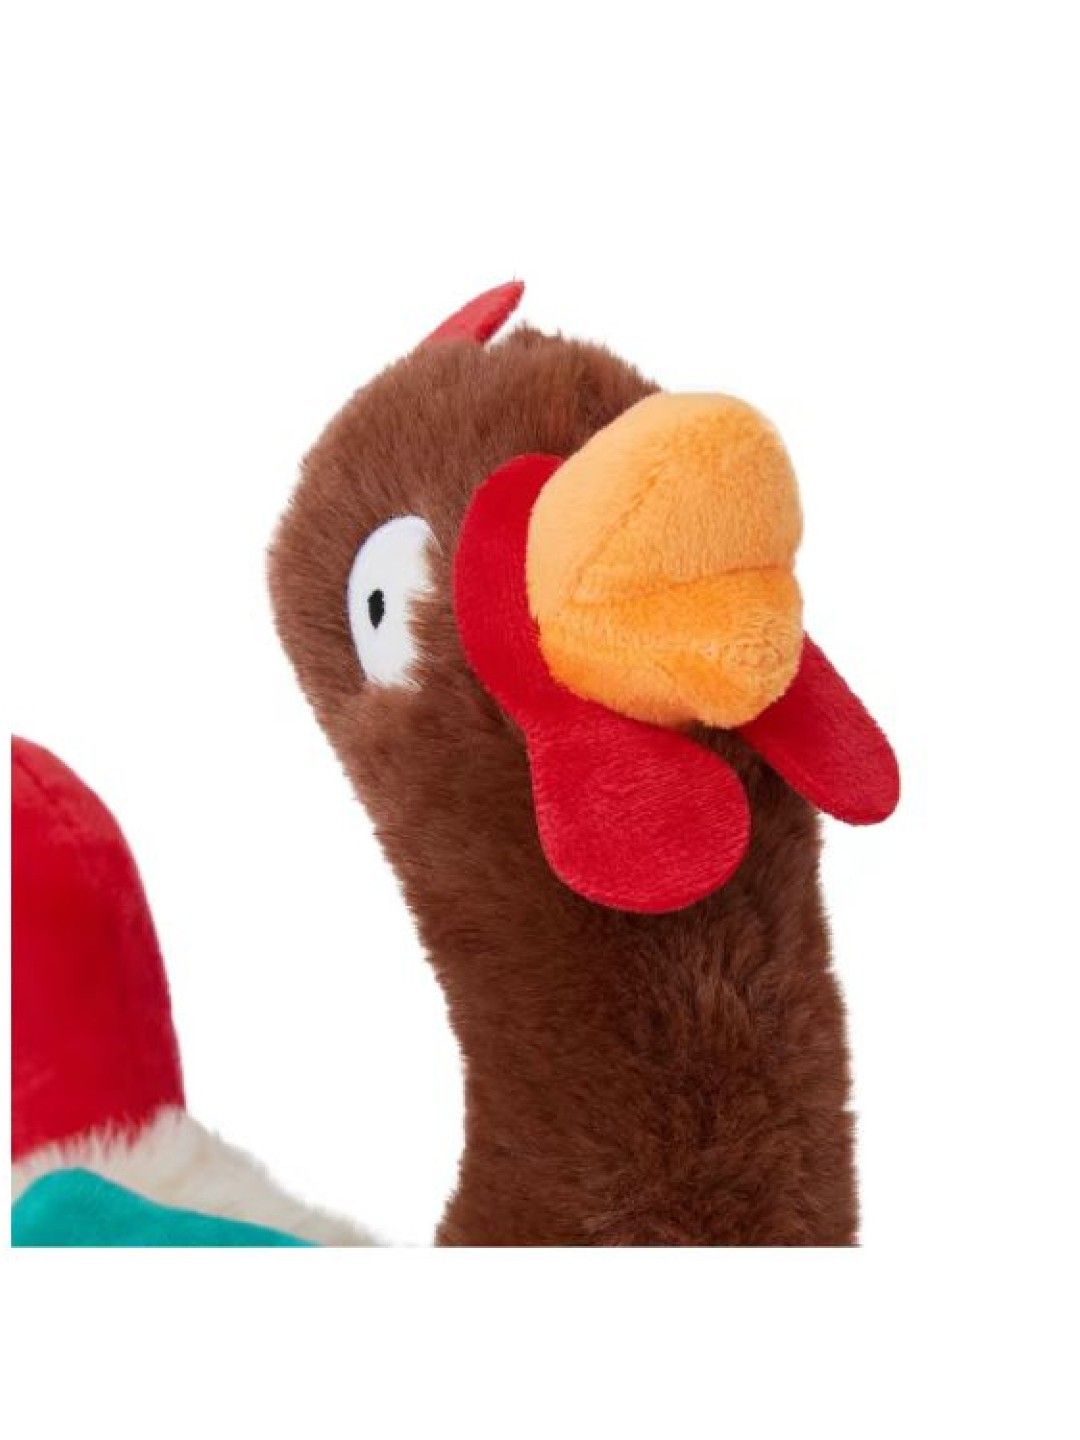 Anko Pet Toy Plush Rooster (Multicolor- Image 3)